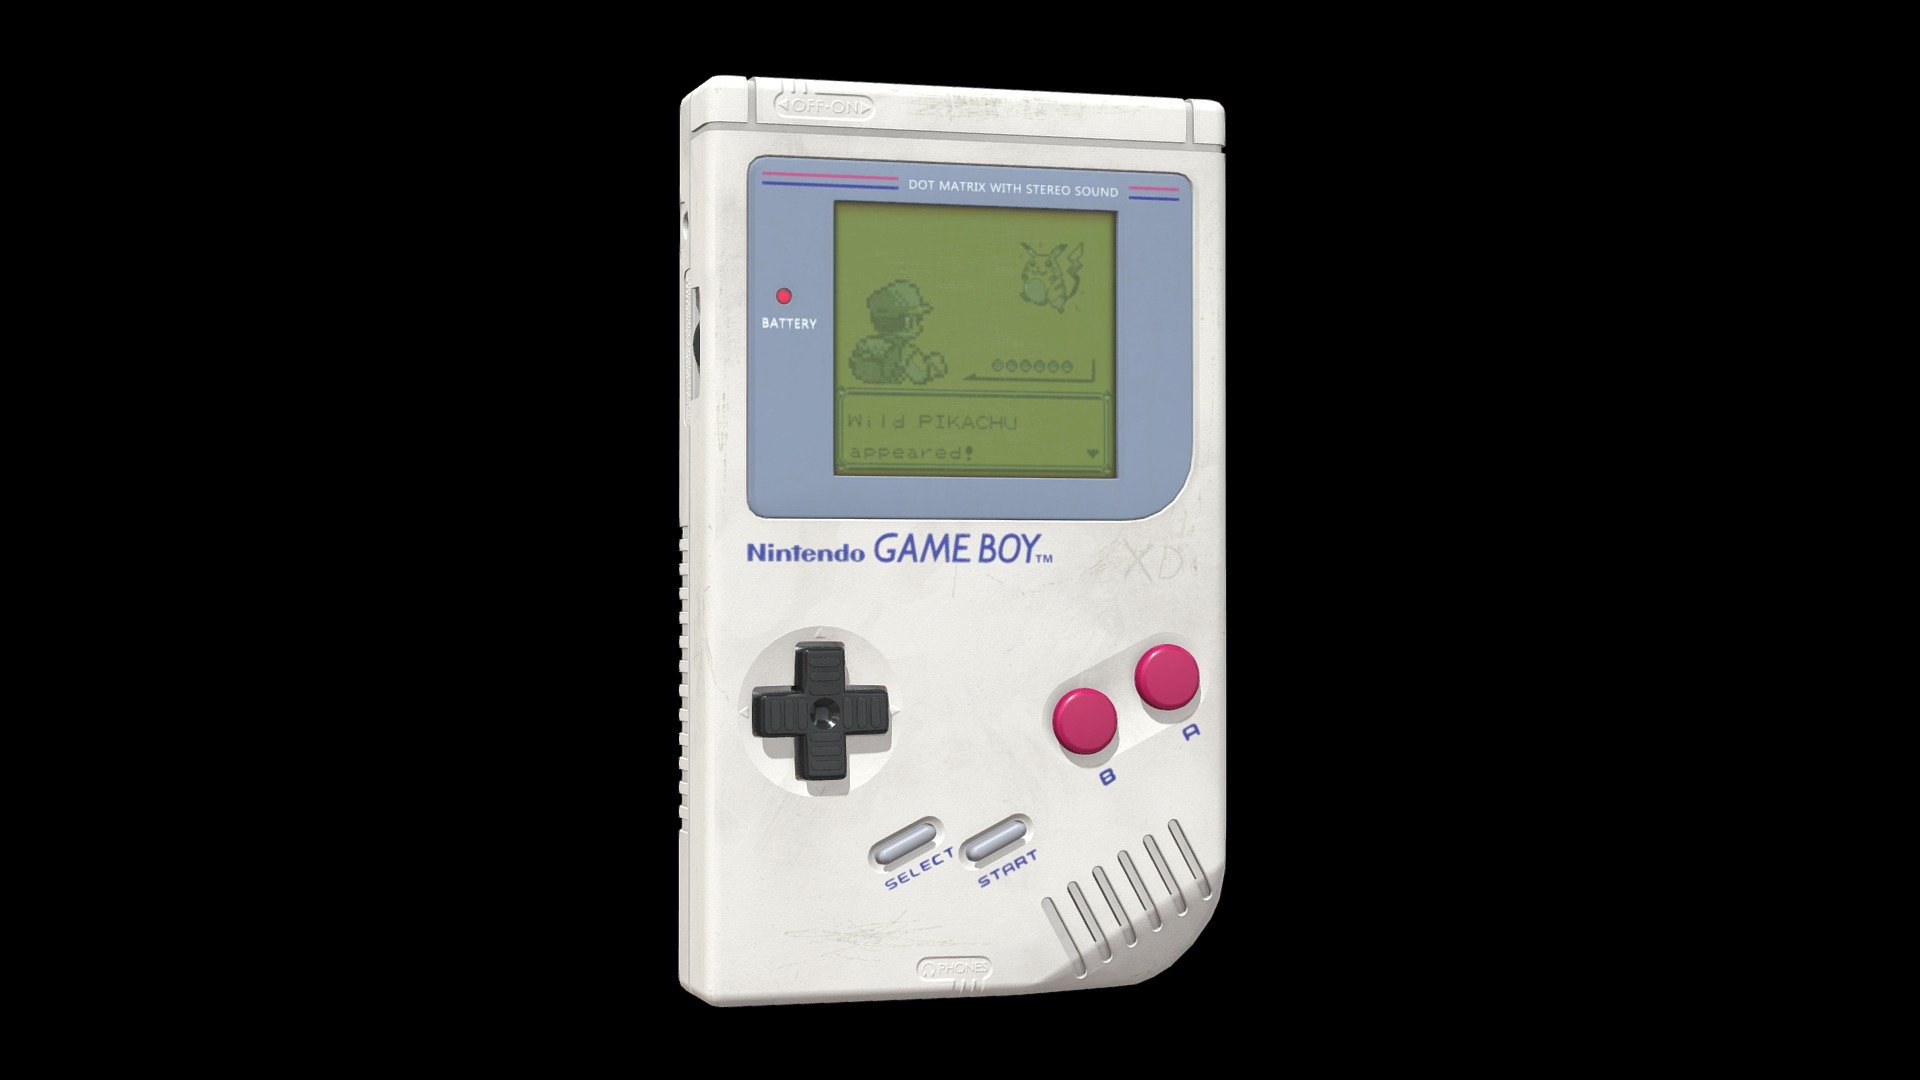 I modeled and textured a retro 1989 Nintendo Gameboy!  I tried to keep polygon count low and texture resolution optimized so there is 2 texture sets, one for the gameboy and one for the game cartridge which is Pokemon Yellow! I followed reference as close as I could and tried to get every last detail, even the game connector prongs!  Let me know what you think of my model :D - Nintendo Gameboy 1989 - 3D model by shrednector 3d model